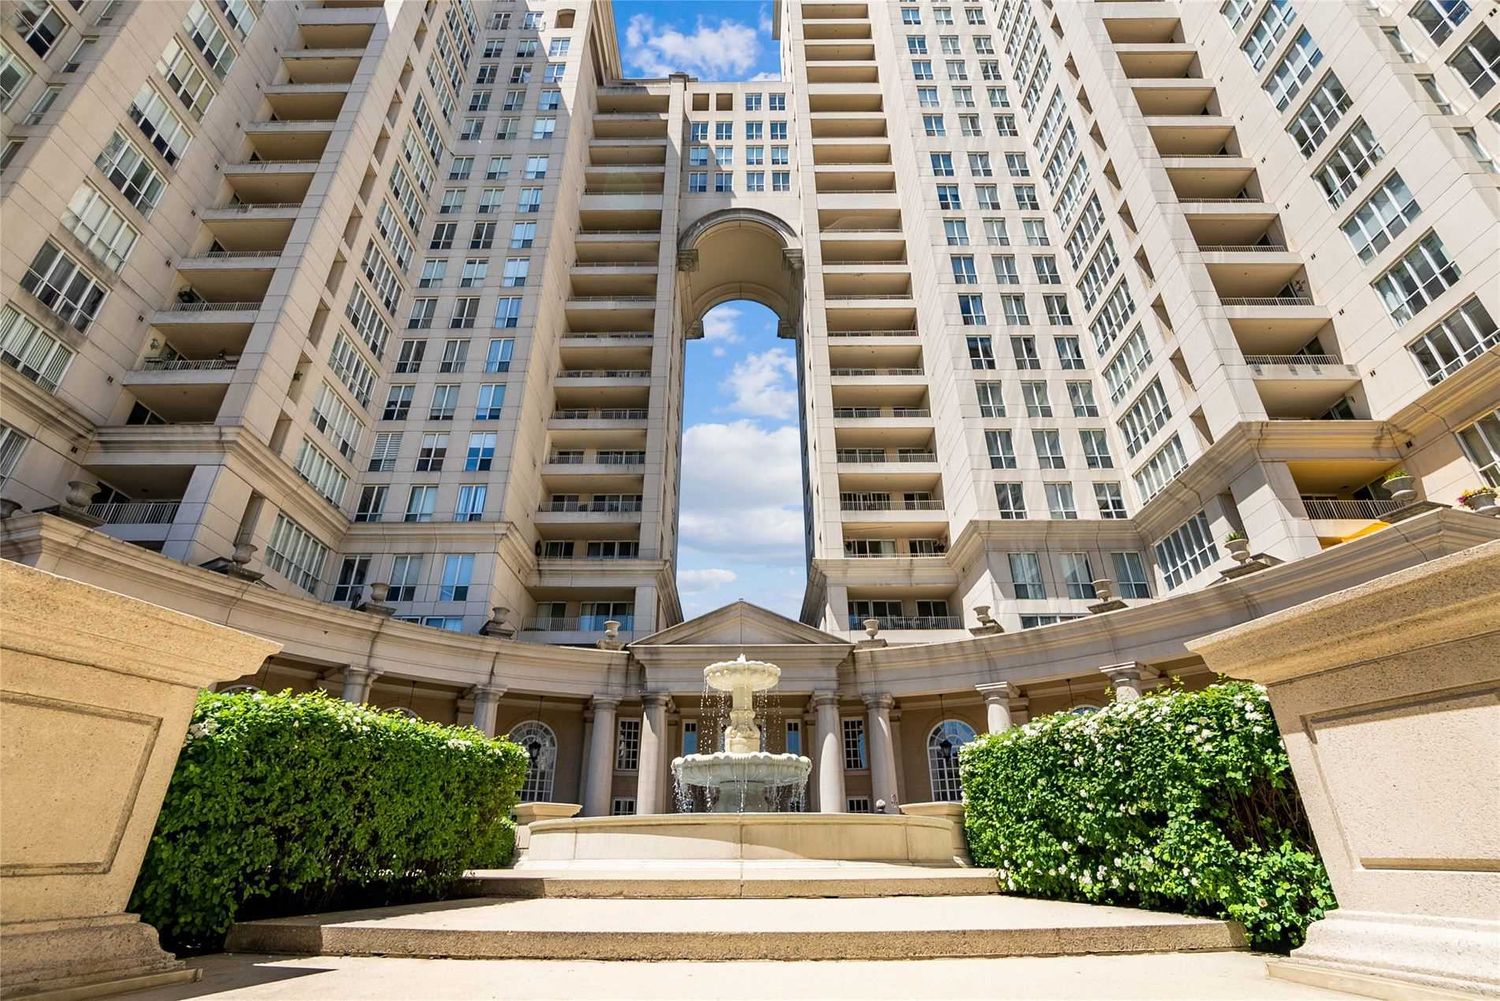 2285 Lake Shore Boulevard W. Grand Harbour Condos is located in  Etobicoke, Toronto - image #2 of 2